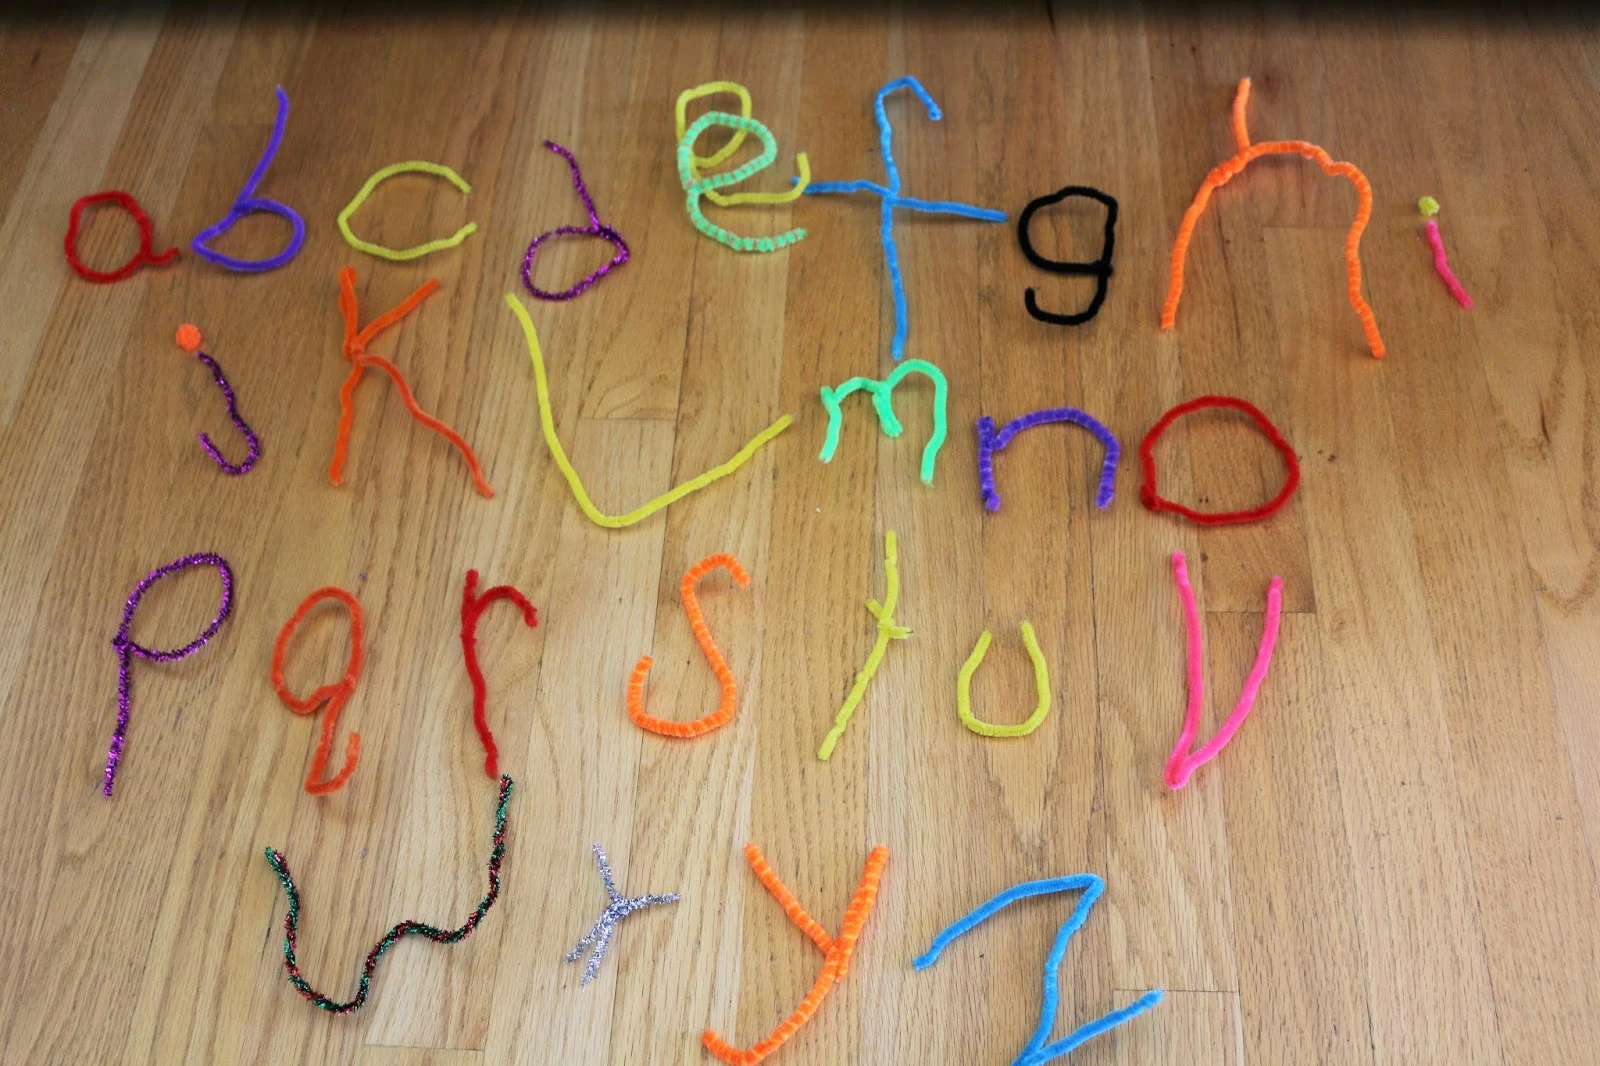 Spelling with Pipe Cleaner Letters